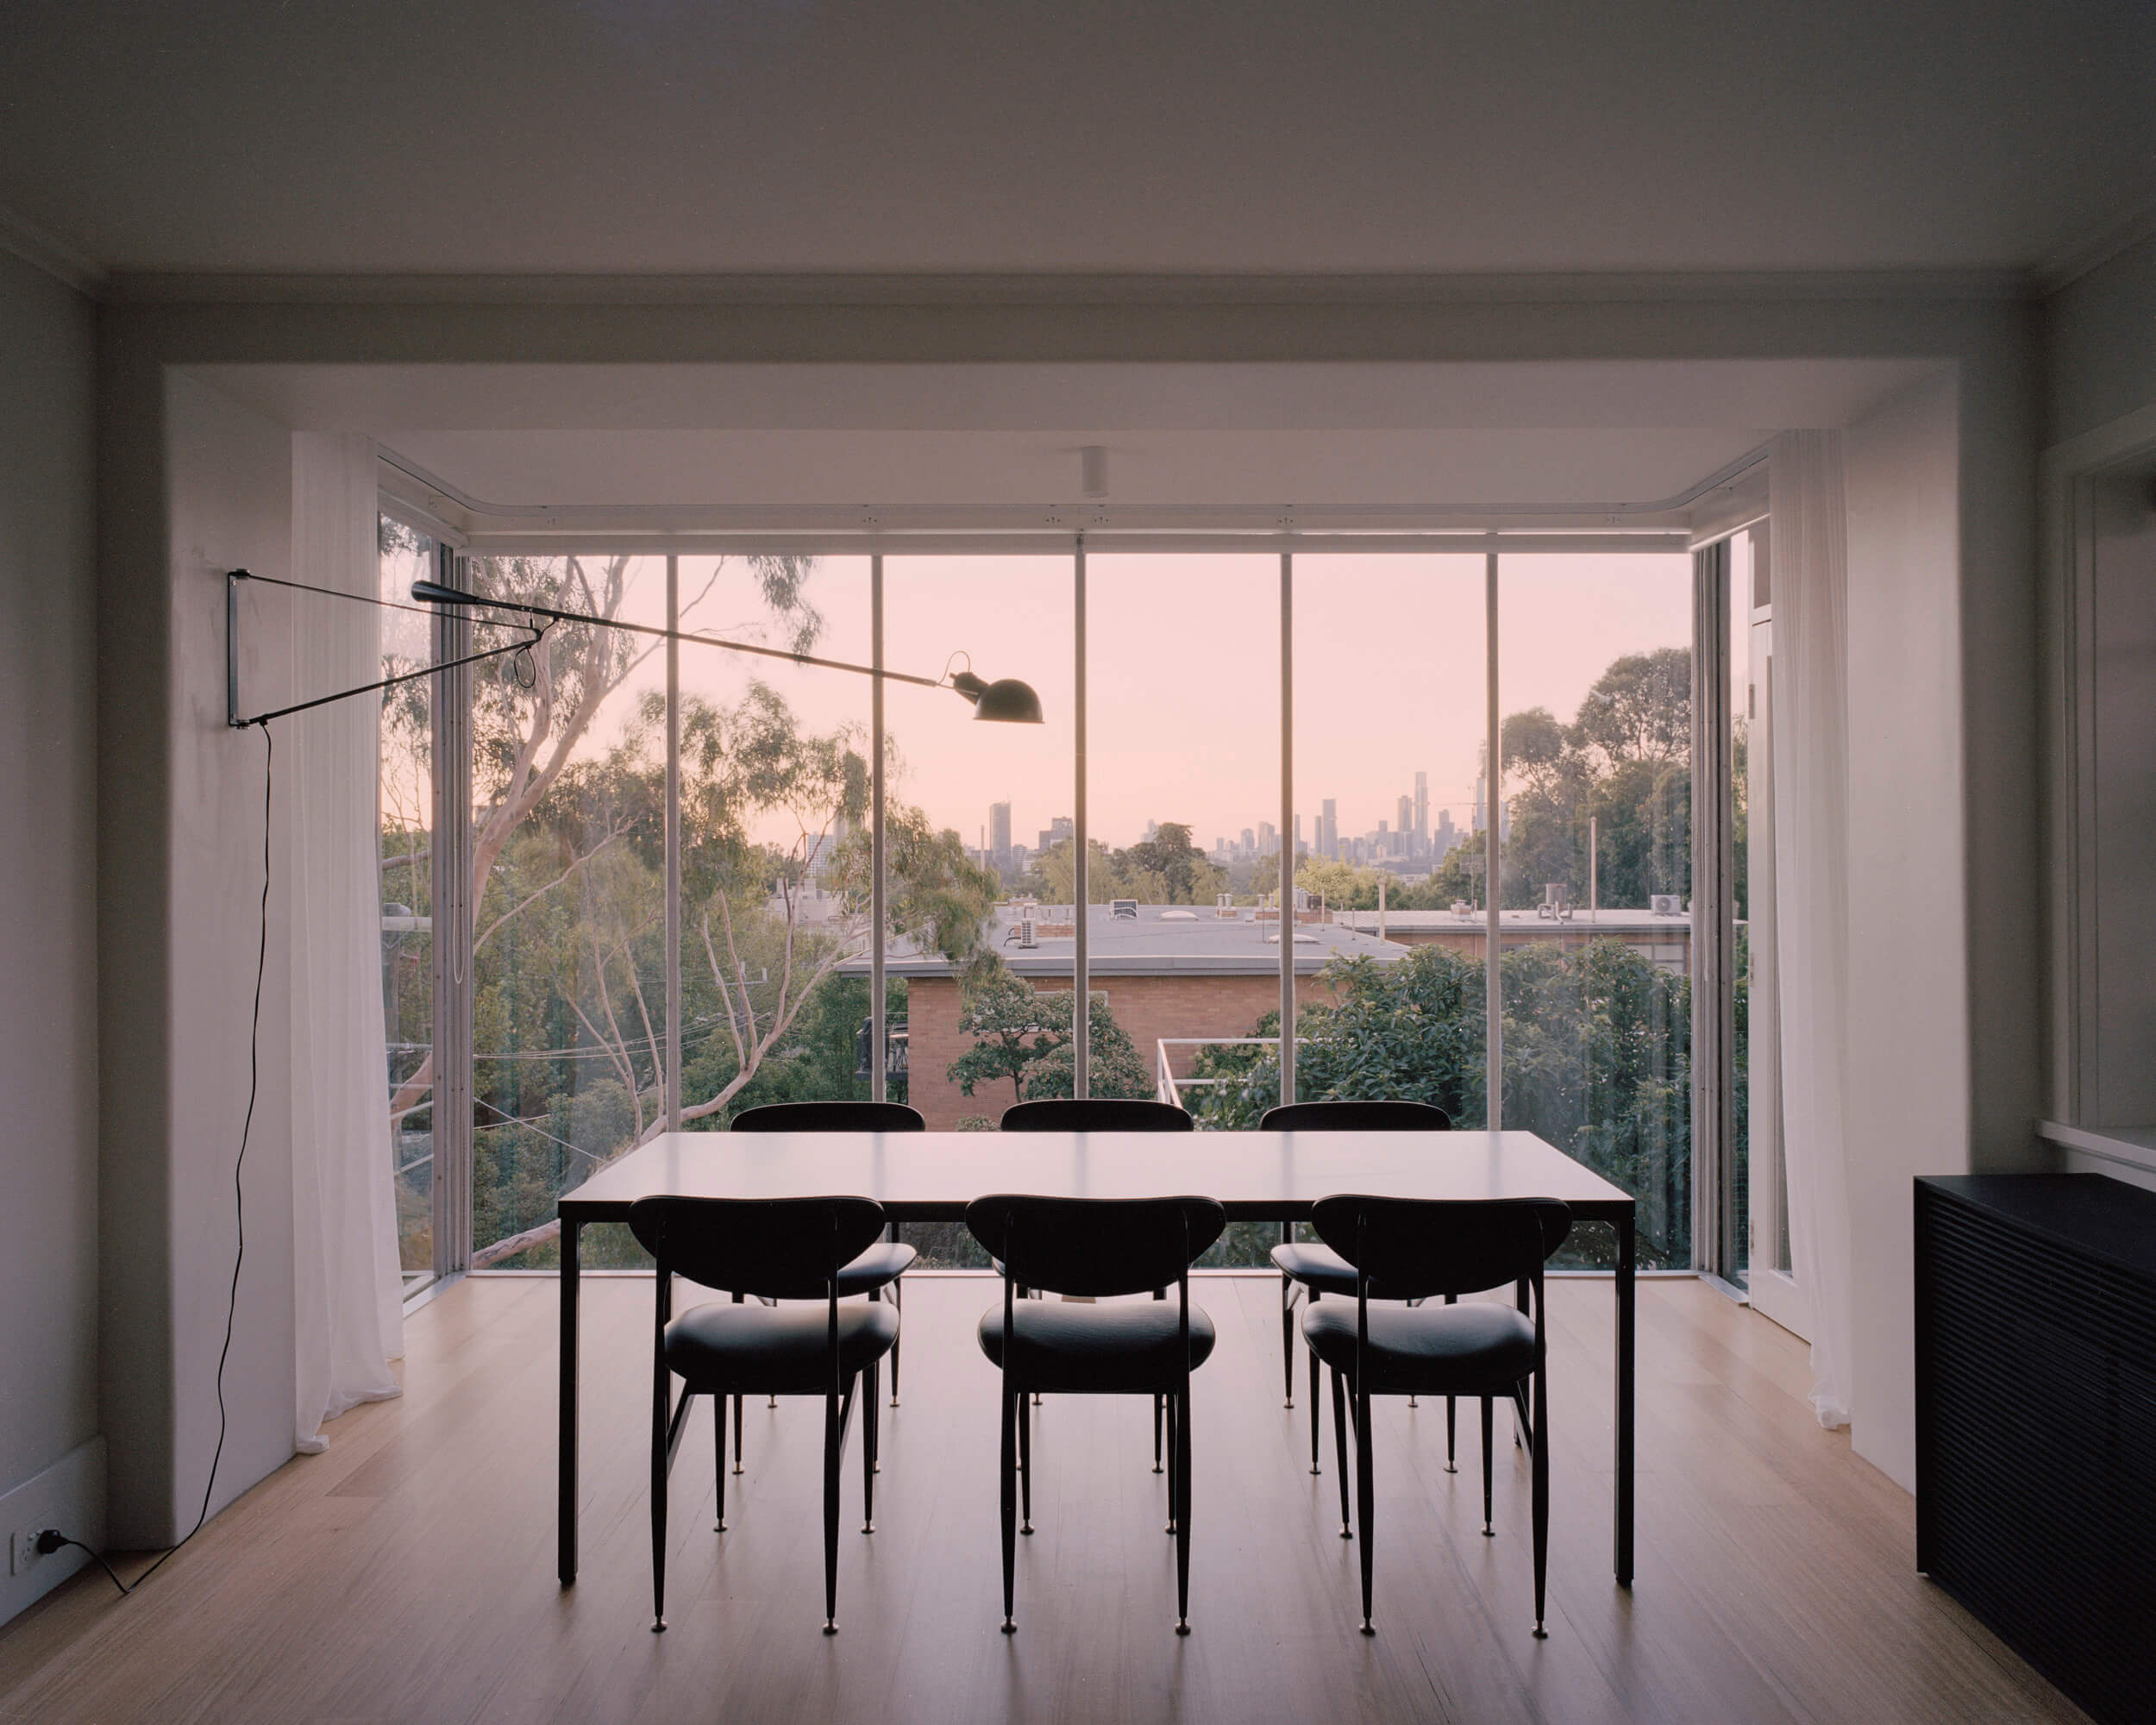 Olive Dining Table. Featherston Scape Chairs. Melbourne City Views. Ellul Architecture. Caringal Flats